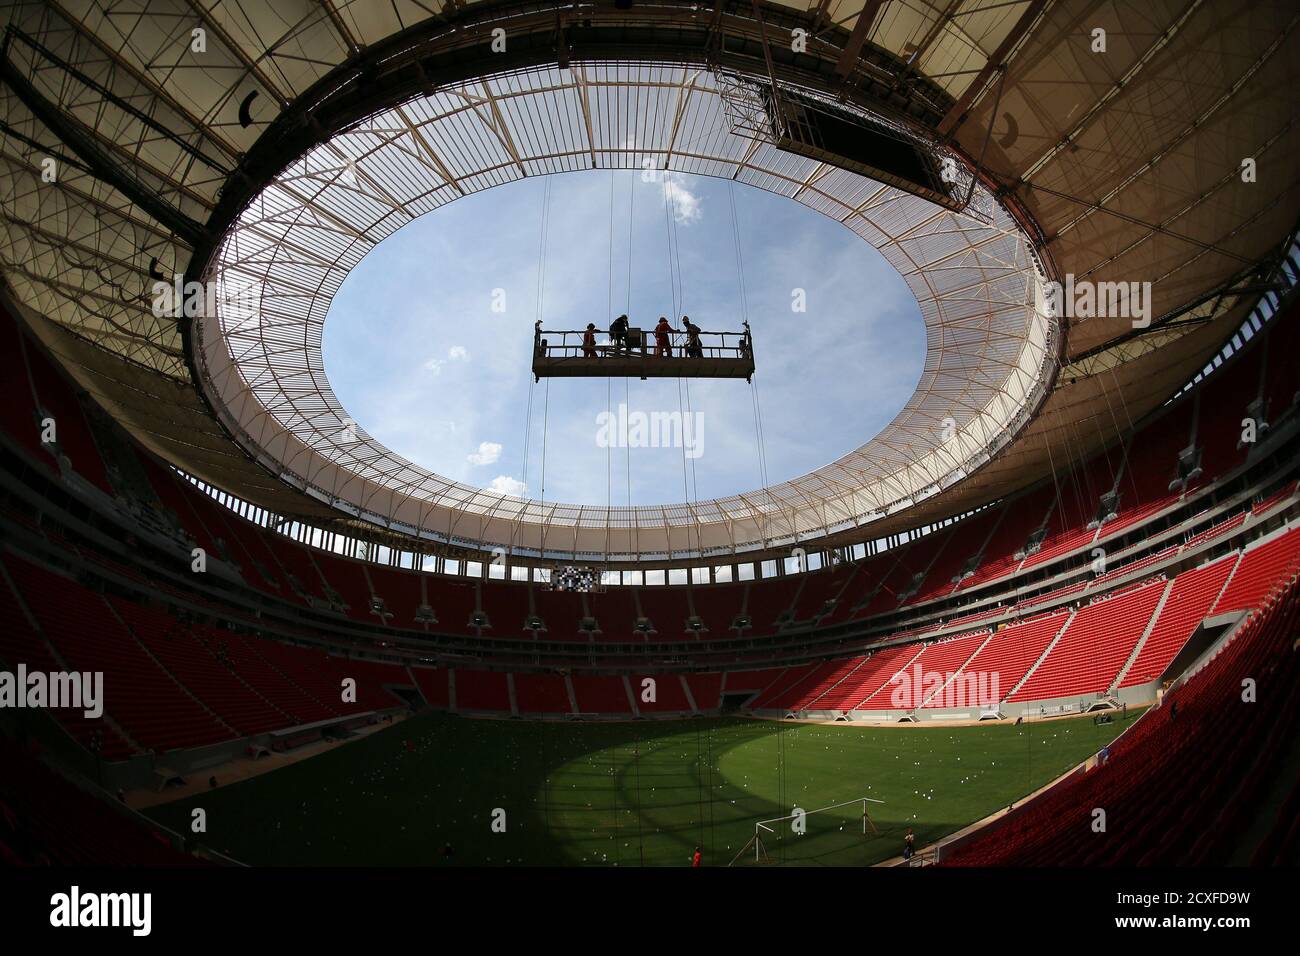 Labourers stand in a suspended platform at the National Mane Garrincha stadium in Brasilia May 10, 2013. The stadium will be one of the venues for the 2013 Confederations Cup and the 2014 World Cup. According to the consortium in charge, the construction of the stadium is considered around 97 percent complete. REUTERS/Ueslei Marcelino (BRAZIL - Tags: SPORT SOCCER BUSINESS CONSTRUCTION)  FOR BEST QUALITY IMAGE ALSO SEE: GM1E97B1LUM01 Stock Photo